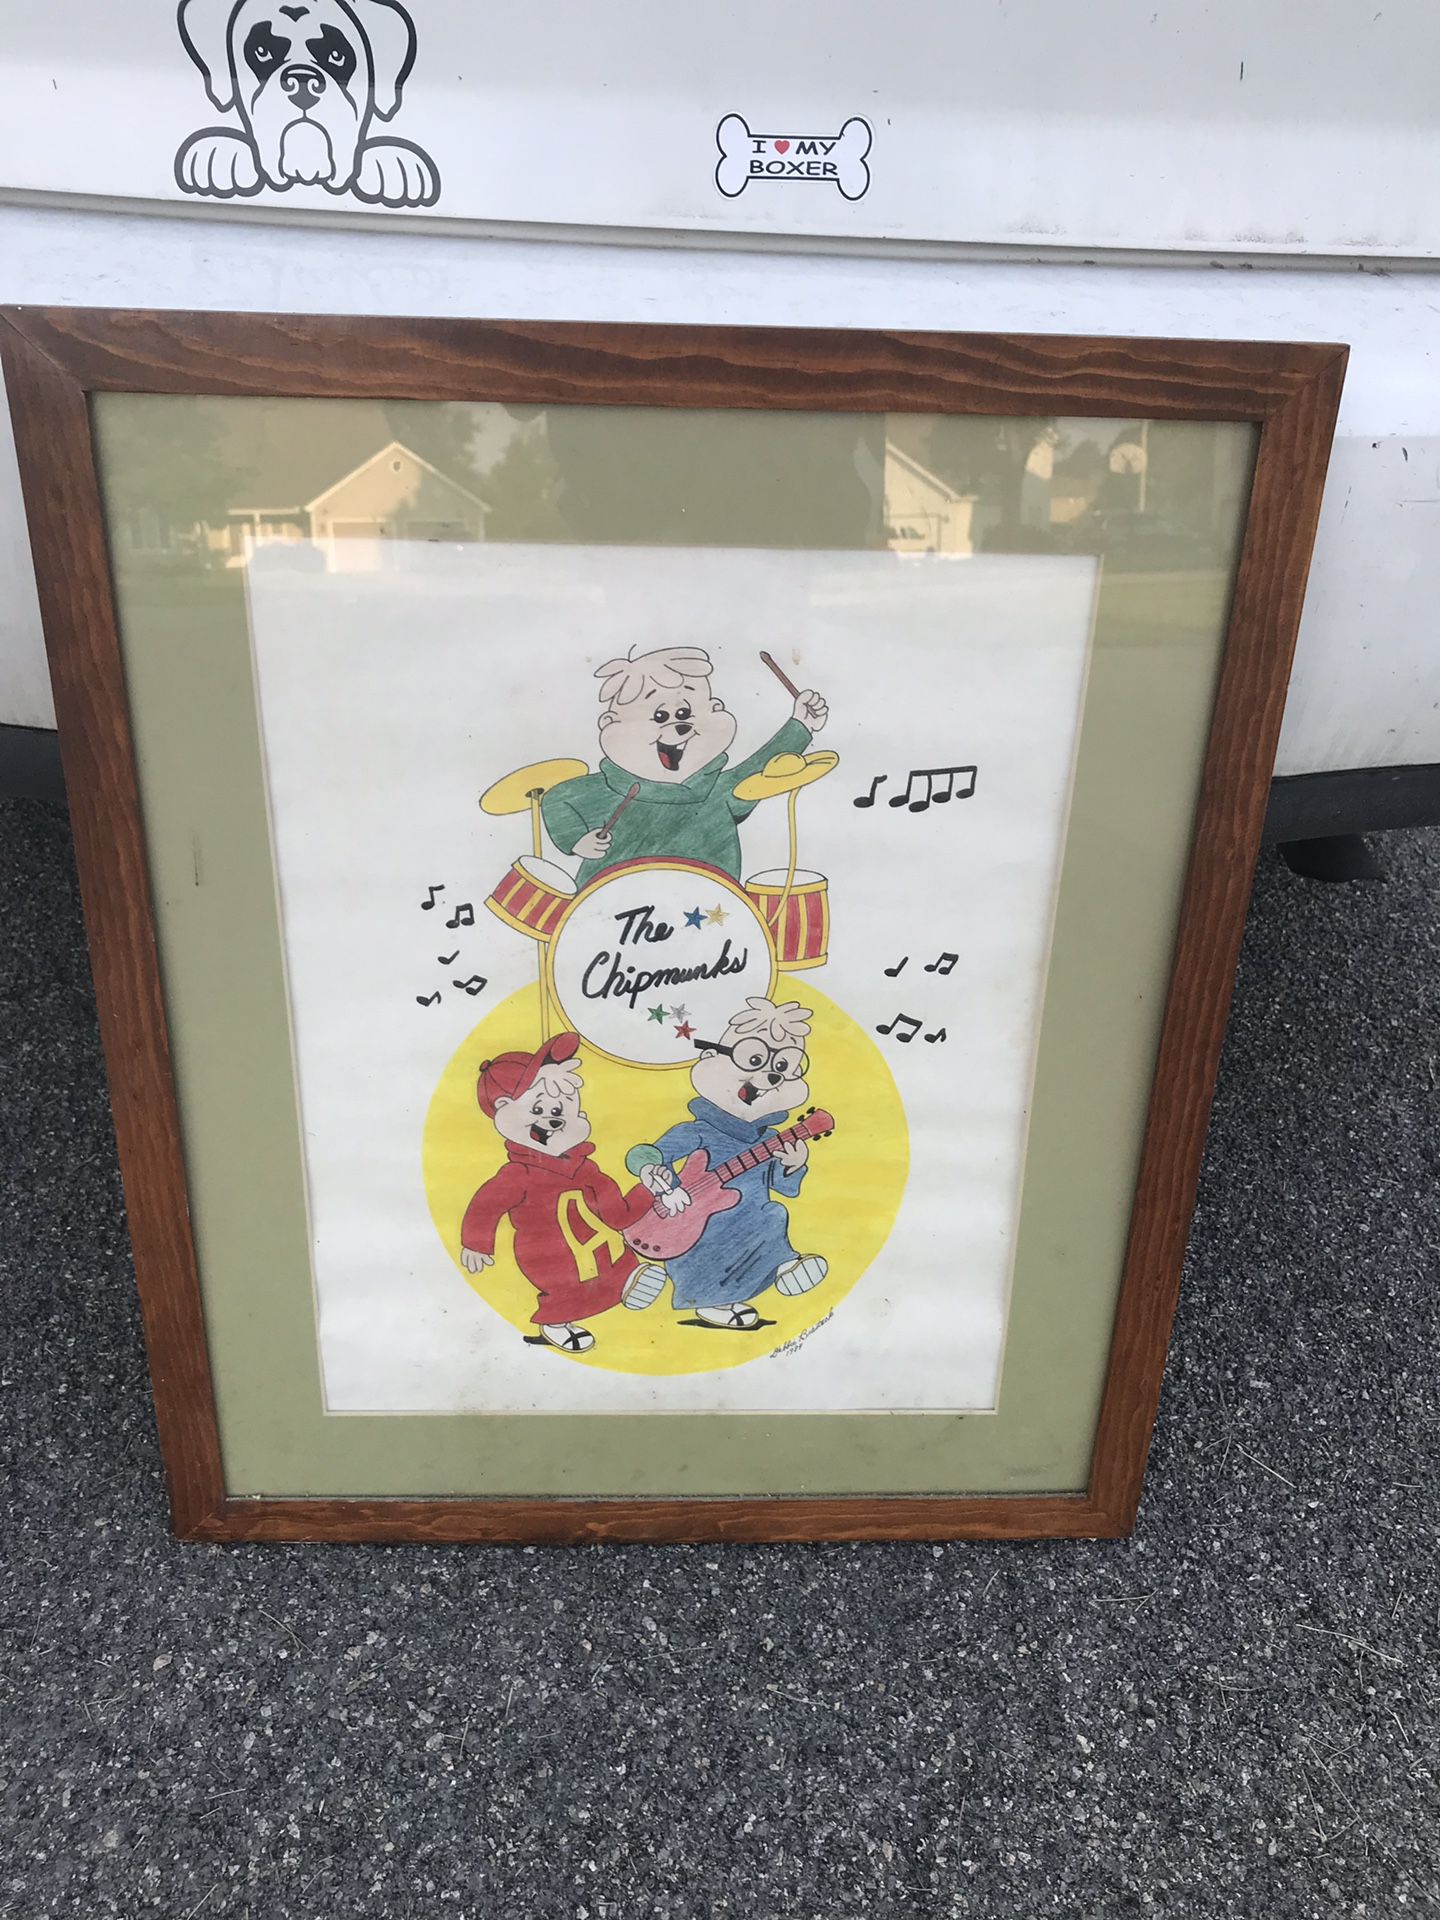 Alvin and the chipmunks picture signed too